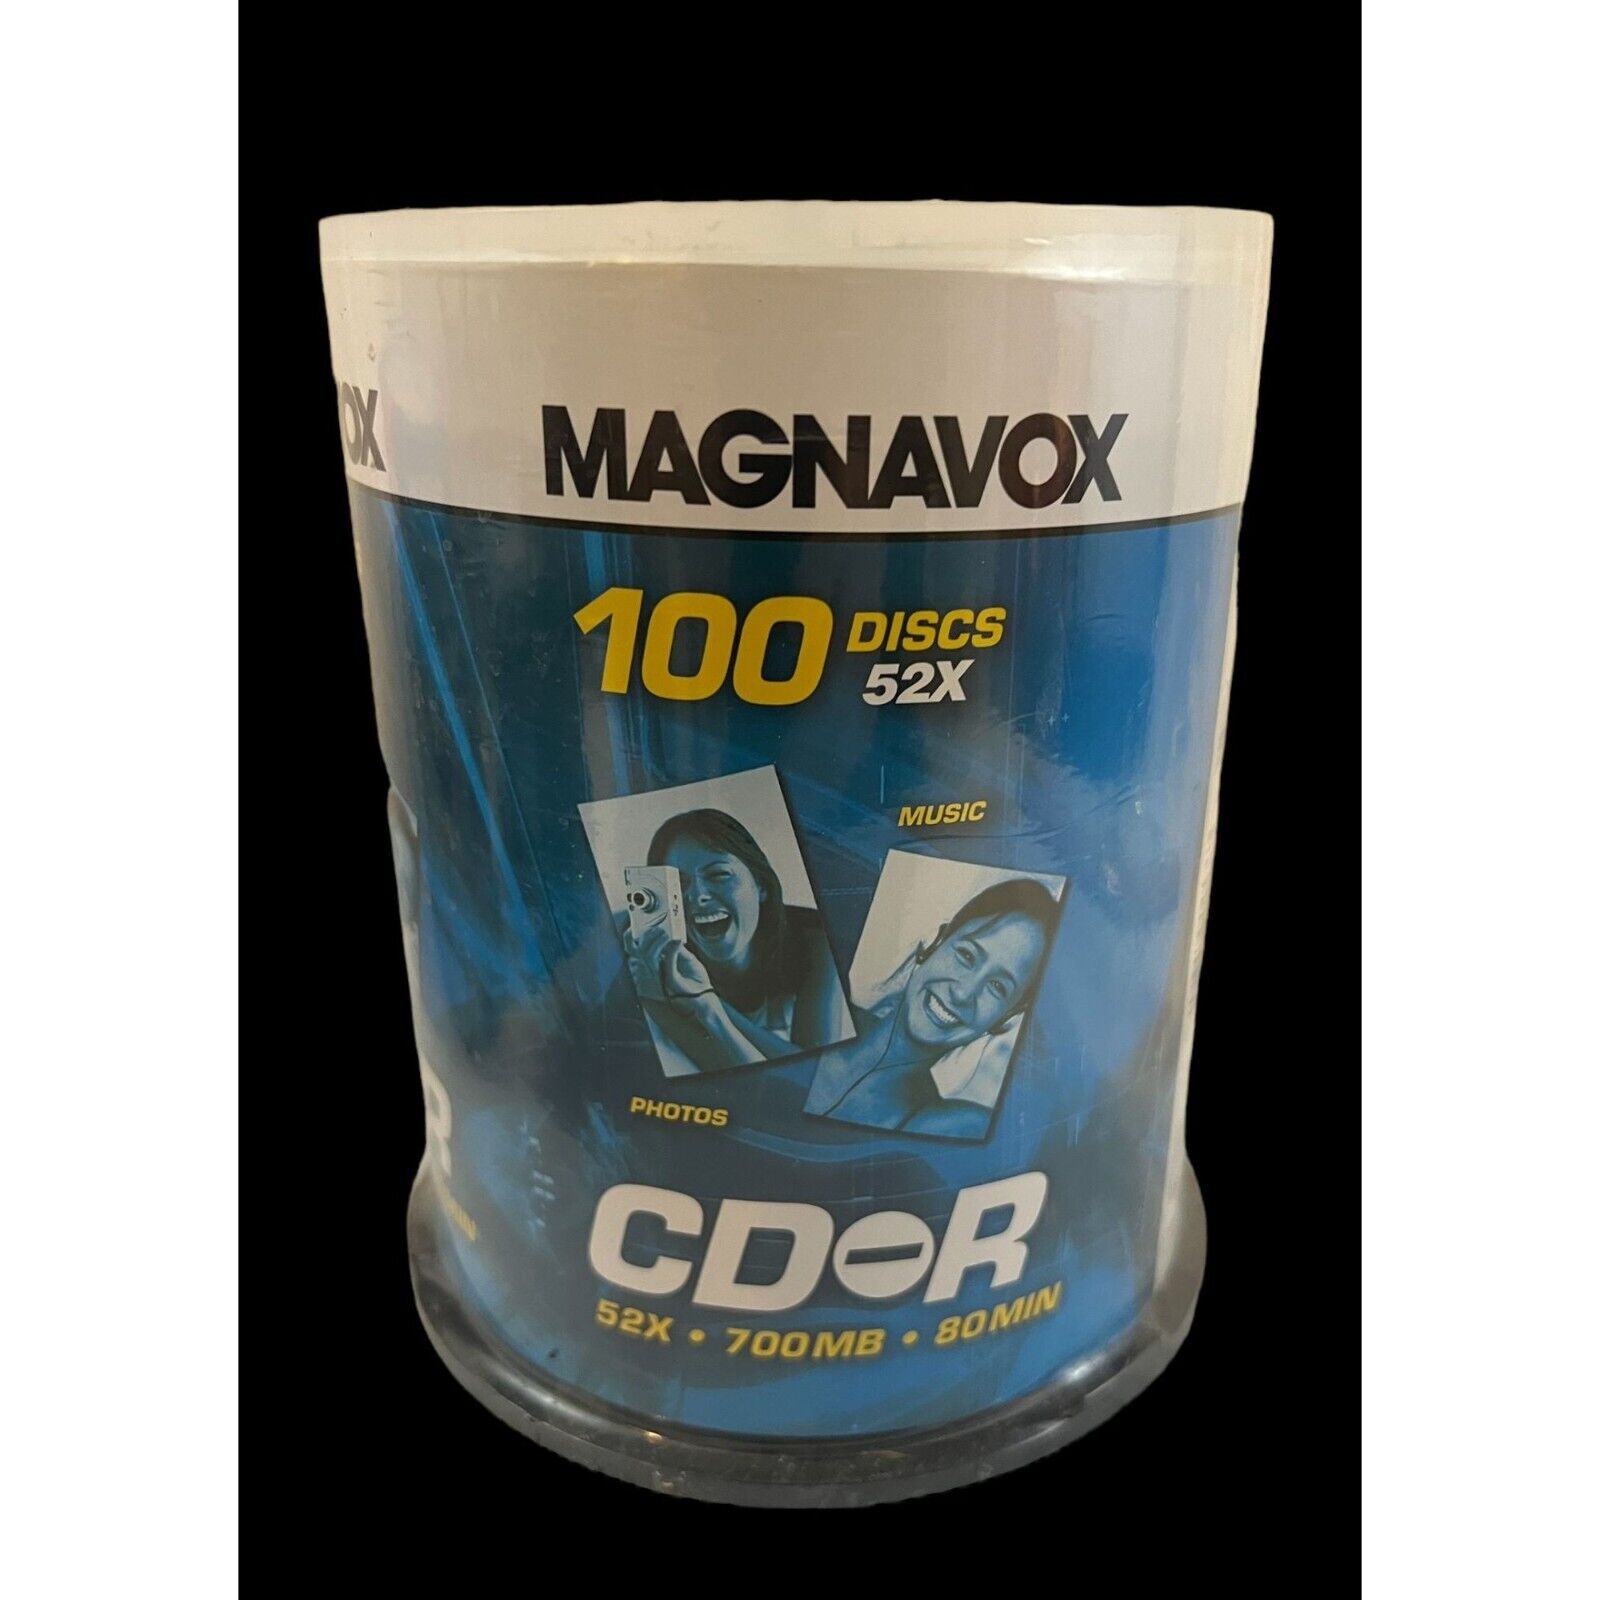 MAGNAVOX CD-R 52x 700MB 80 MIN 100-pack Sealed Blank Recordable New In Package